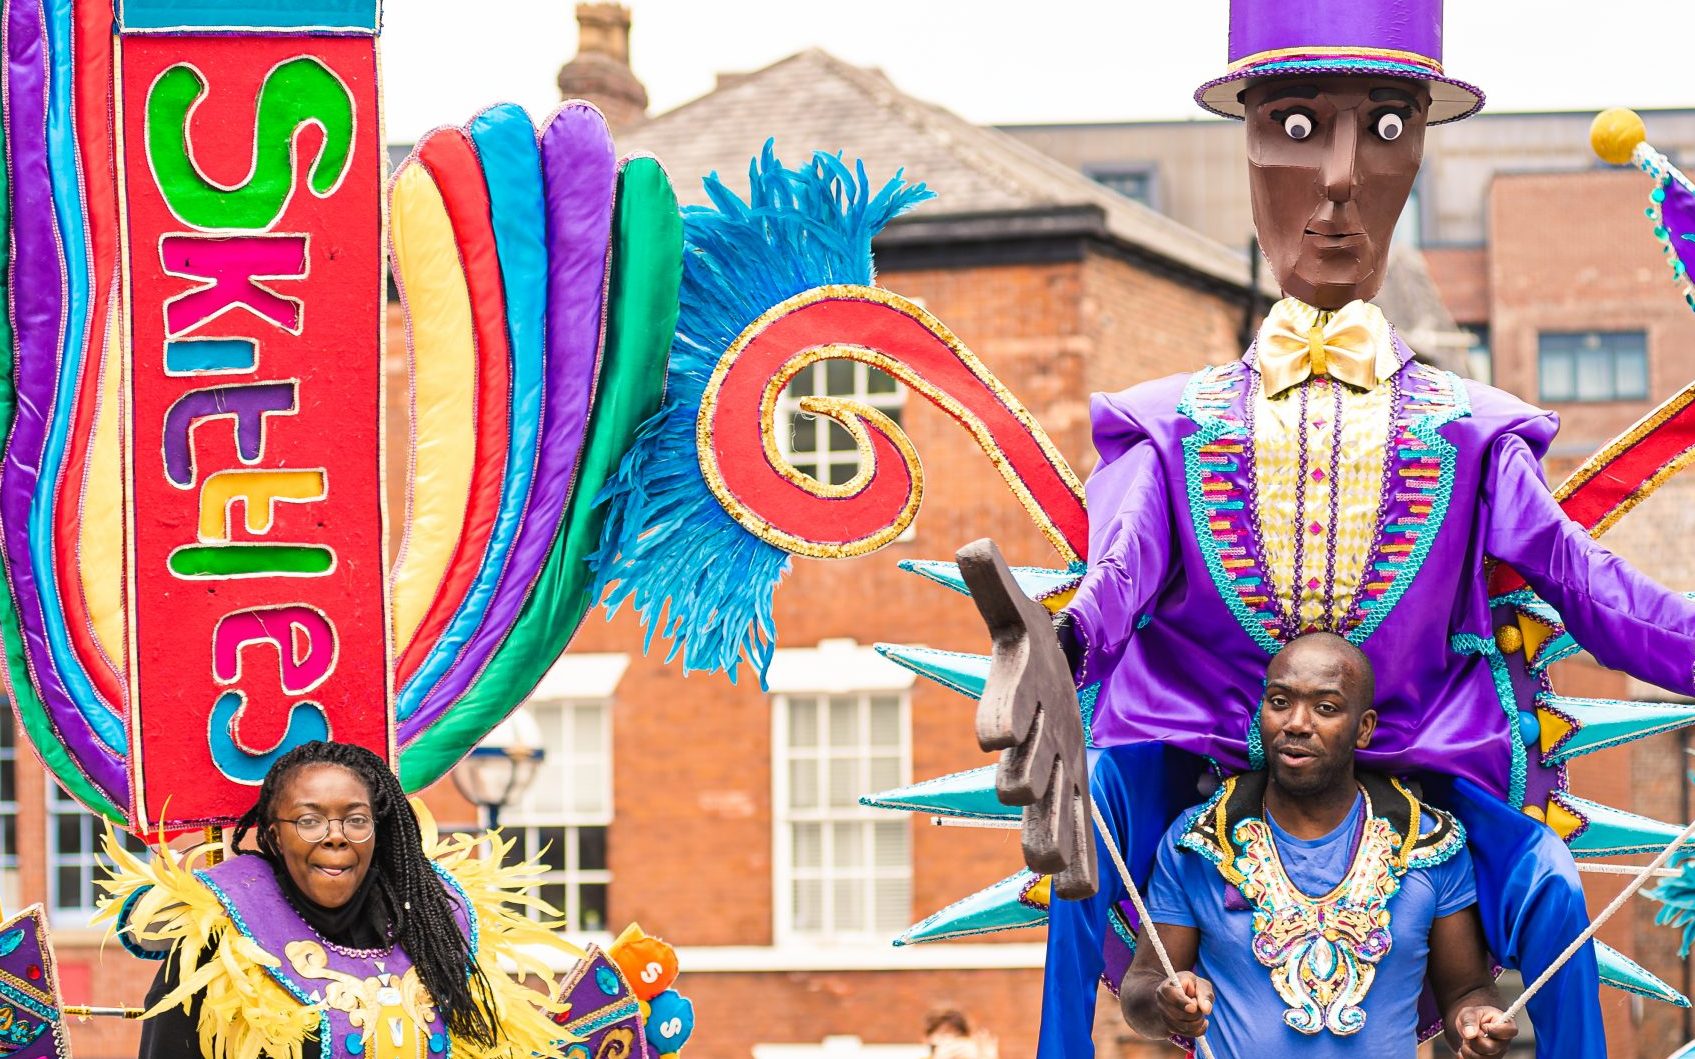 Women and man wearing carnival costumes. One based on Skittles packaging, the other a Willy Wonka Puppet.